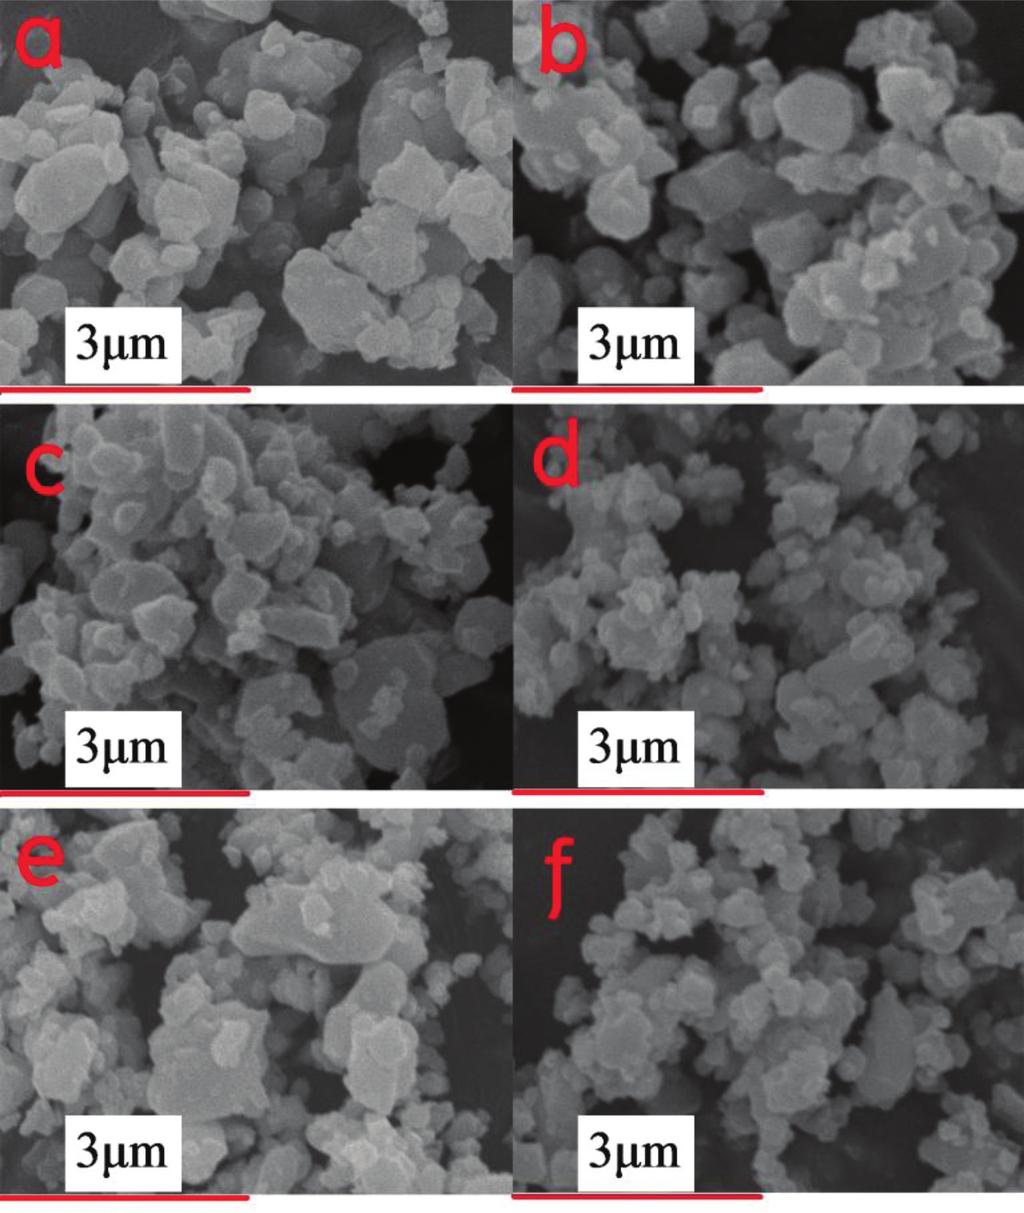 701xml GINF_A_1062682 June 26, 2015 15:12 Thermal Conductivity of Nano ZnO Doped CaFe2 O4 5 Figure 4. The microstructure of powder material. (a) CaFe2 O4 (b) Ca0.9 Zn0.1 Fe2 O4 (c) Ca0.8 Zn0.